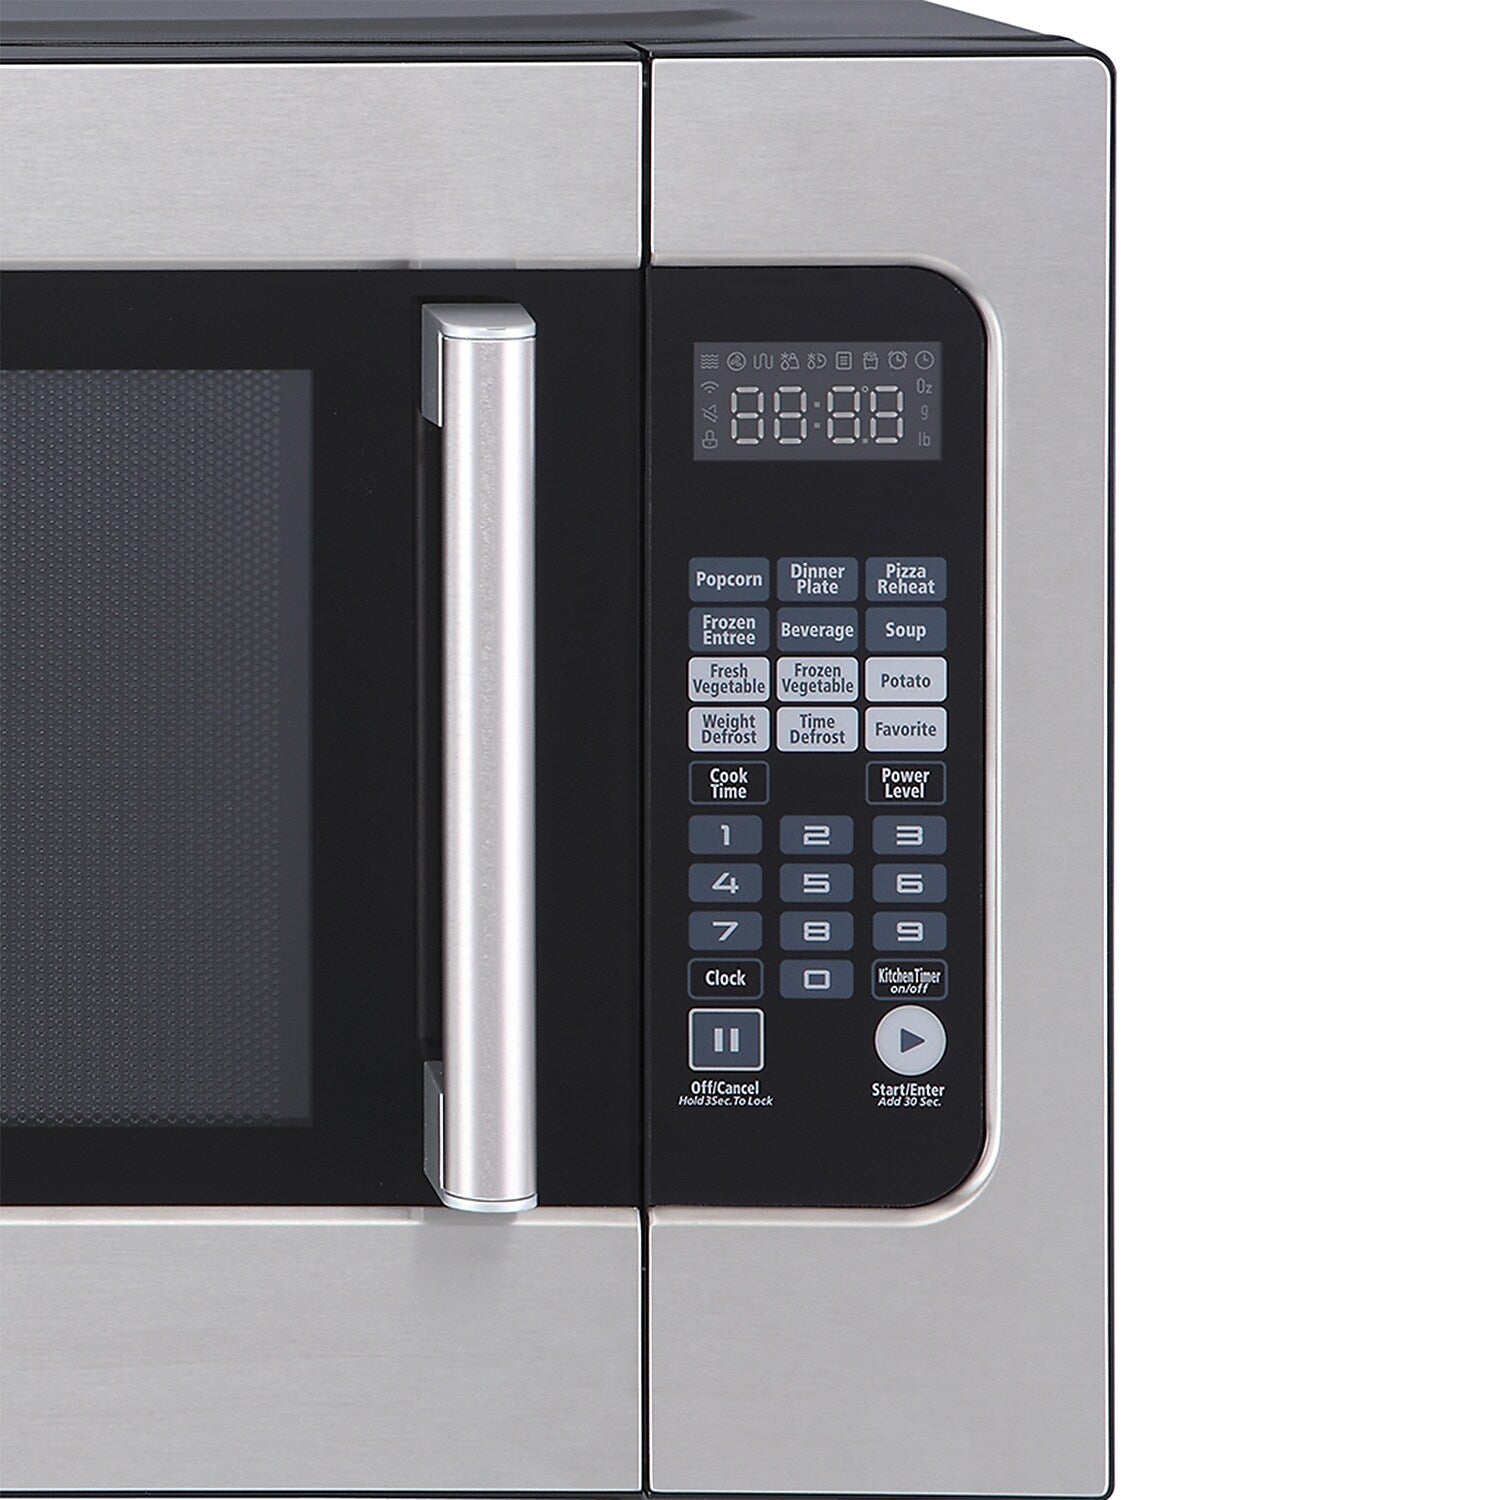 Magic Chef 2.2-Cu. Ft. 1200W Countertop Microwave with Sensor Cook, Stainless Steel